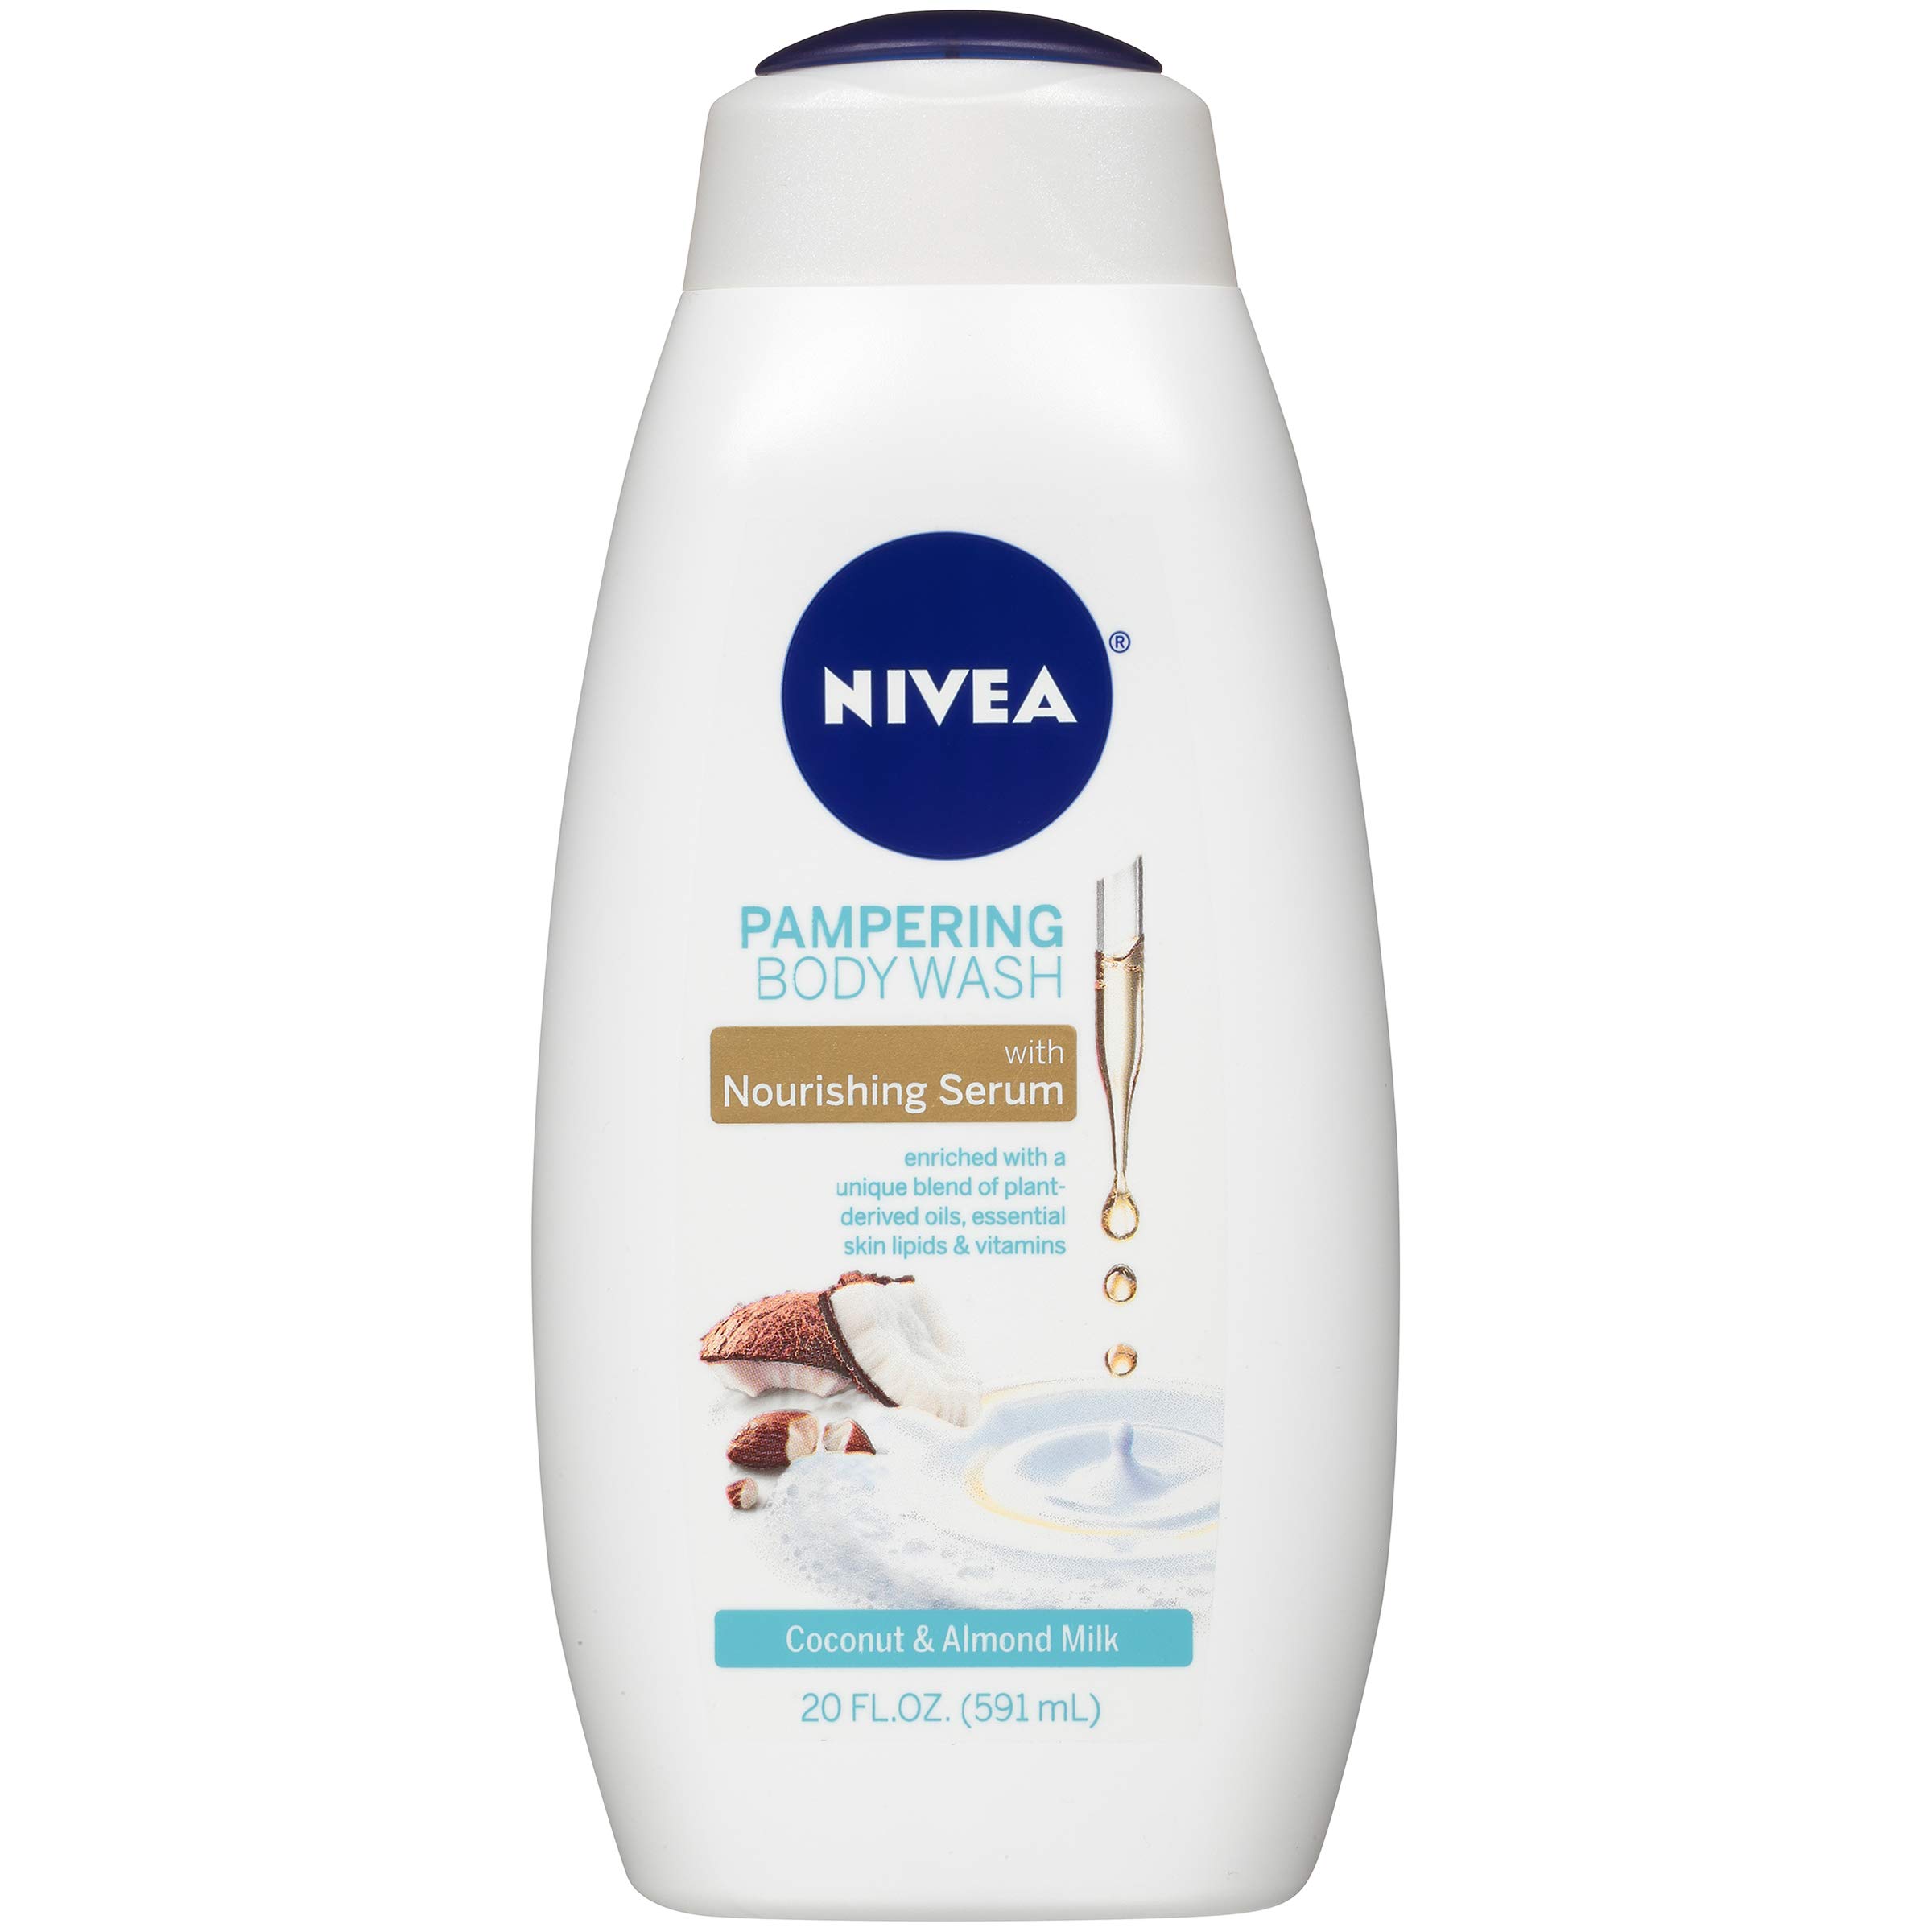 NIVEA Coconut and Almond Milk Body Wash with Nourishing Serum, 20 Fl Oz Bottle + $5 Credit [Subscribe & Save]